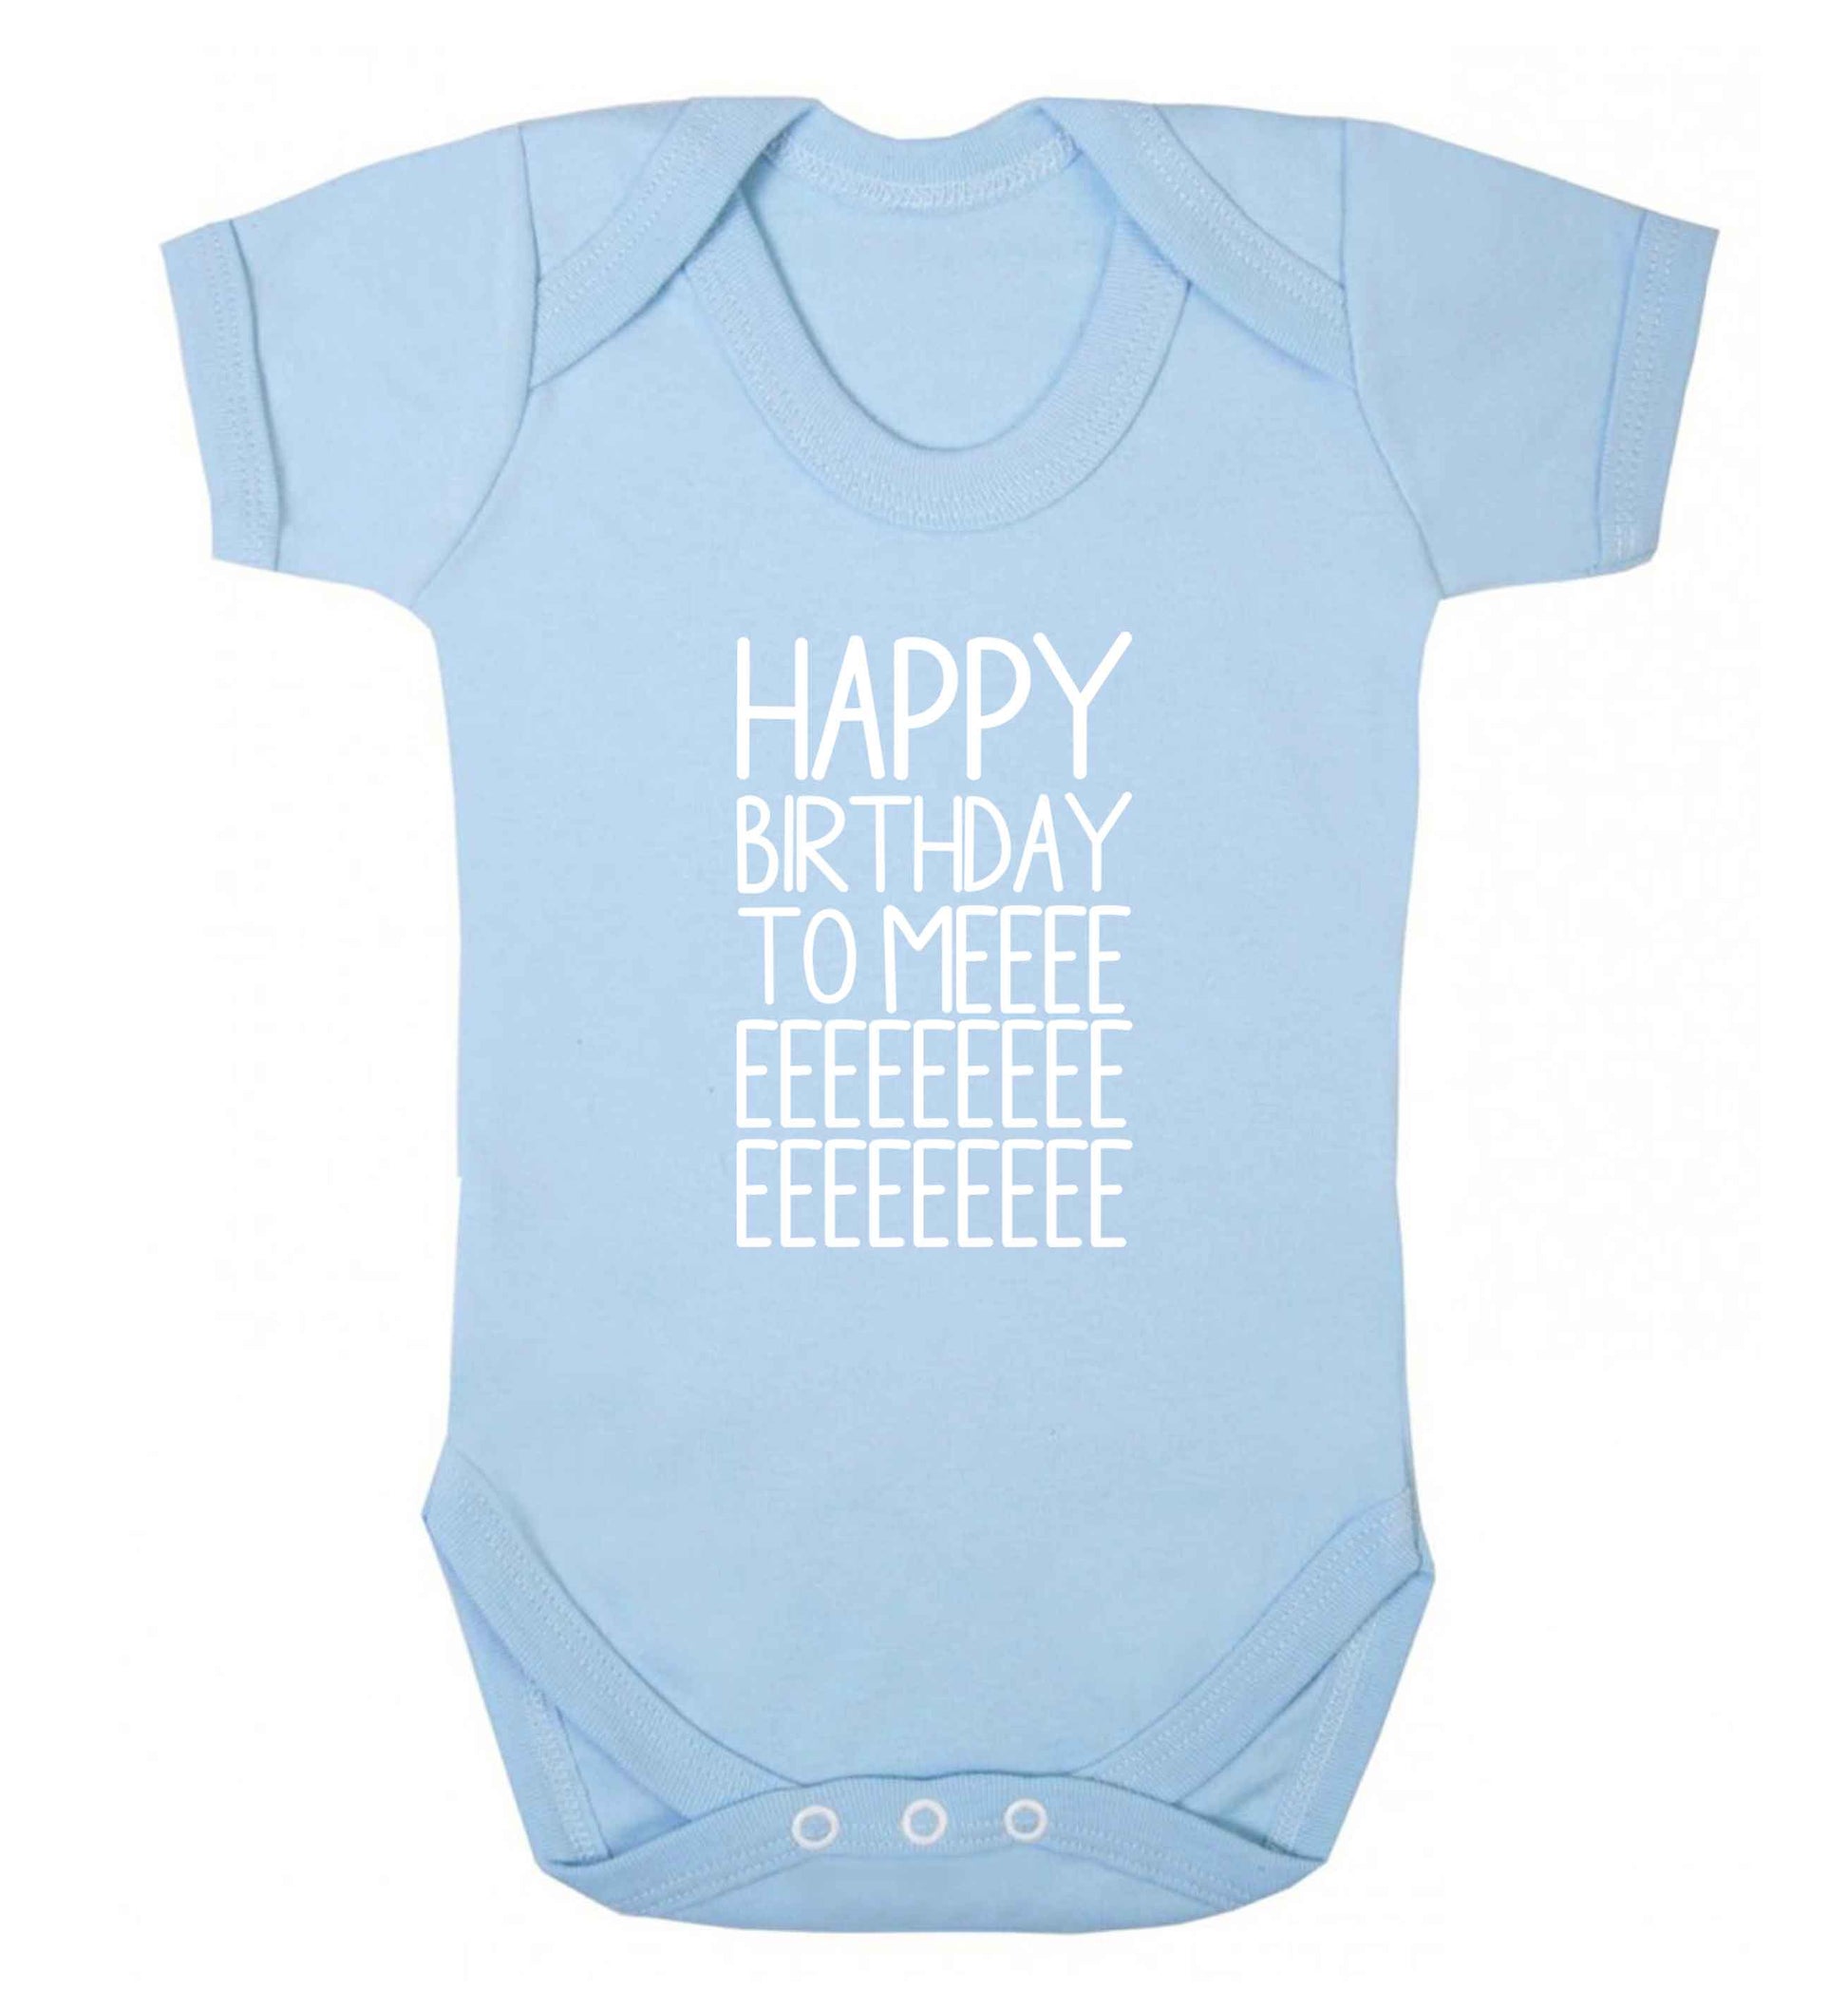 Happy birthday to me baby vest pale blue 18-24 months